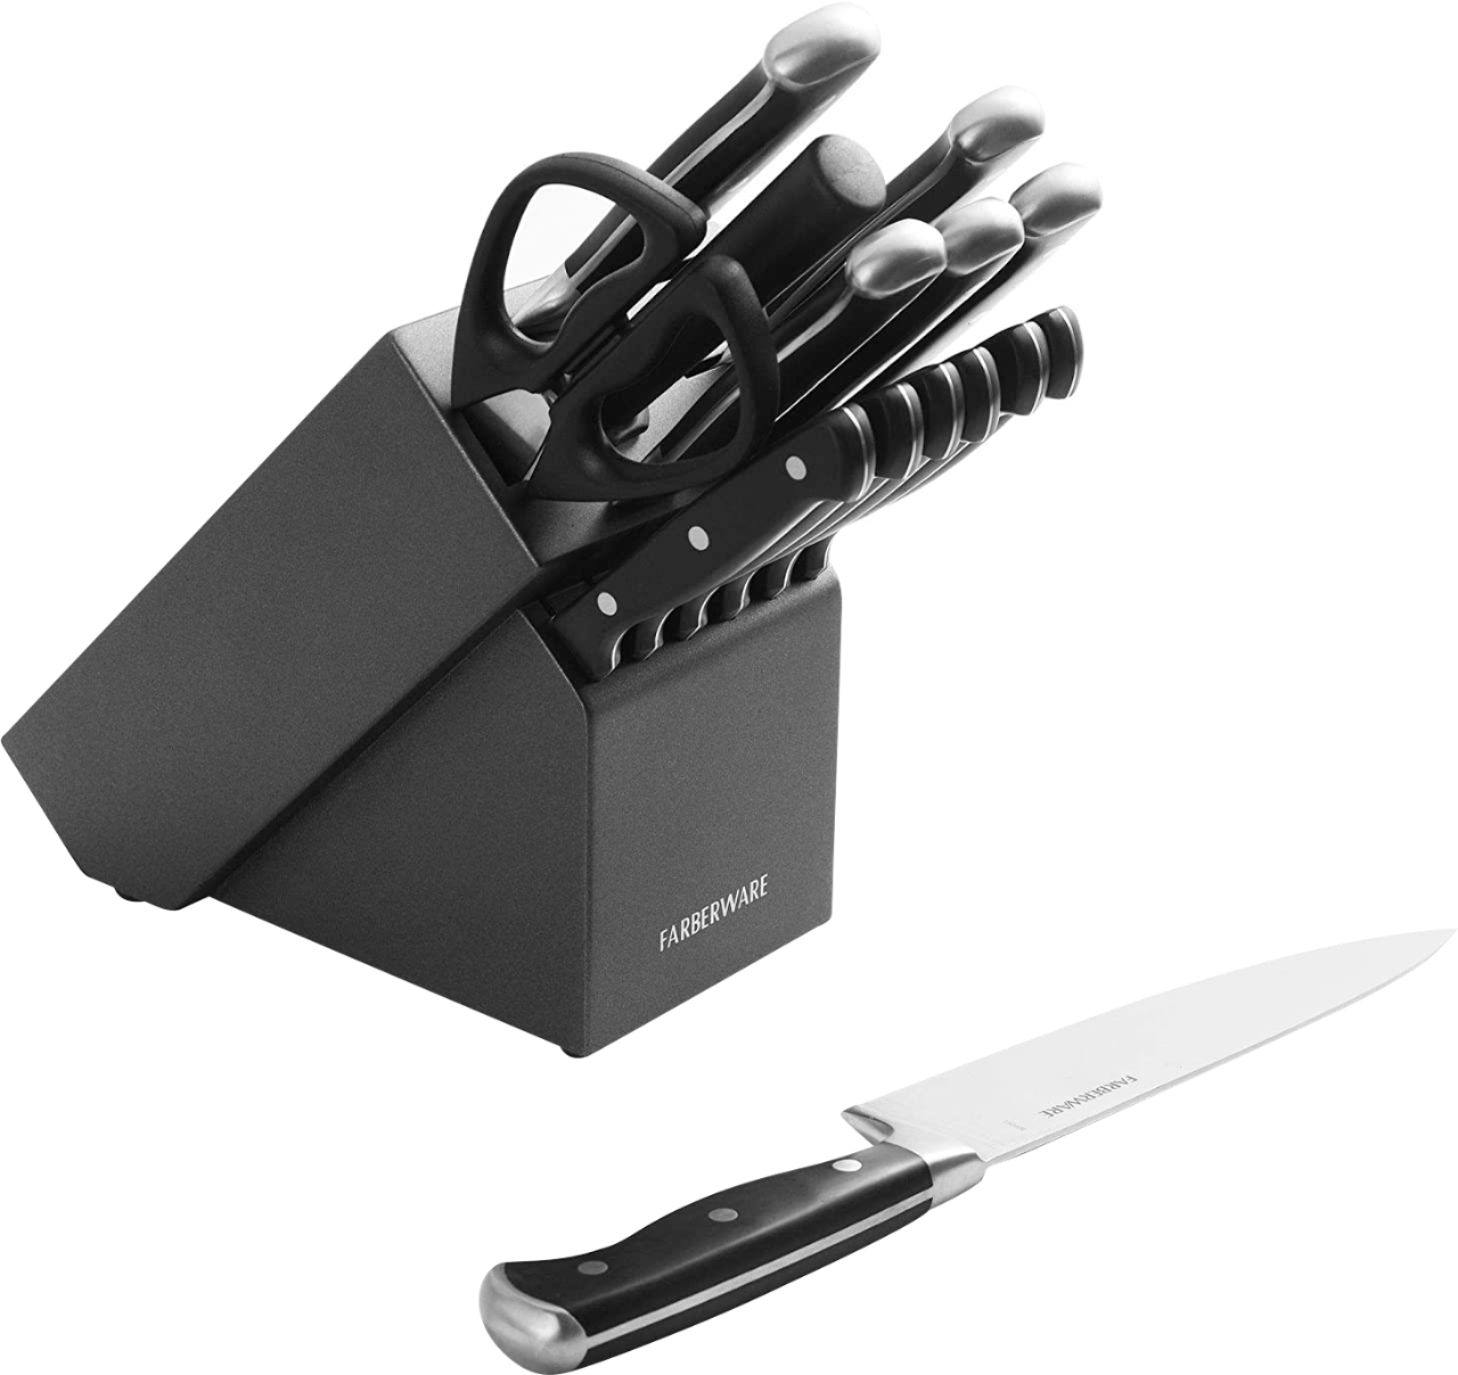 Farberware Platinum Kitchen Knife set Stainless steel 15 piece cutlery -  household items - by owner - housewares sale